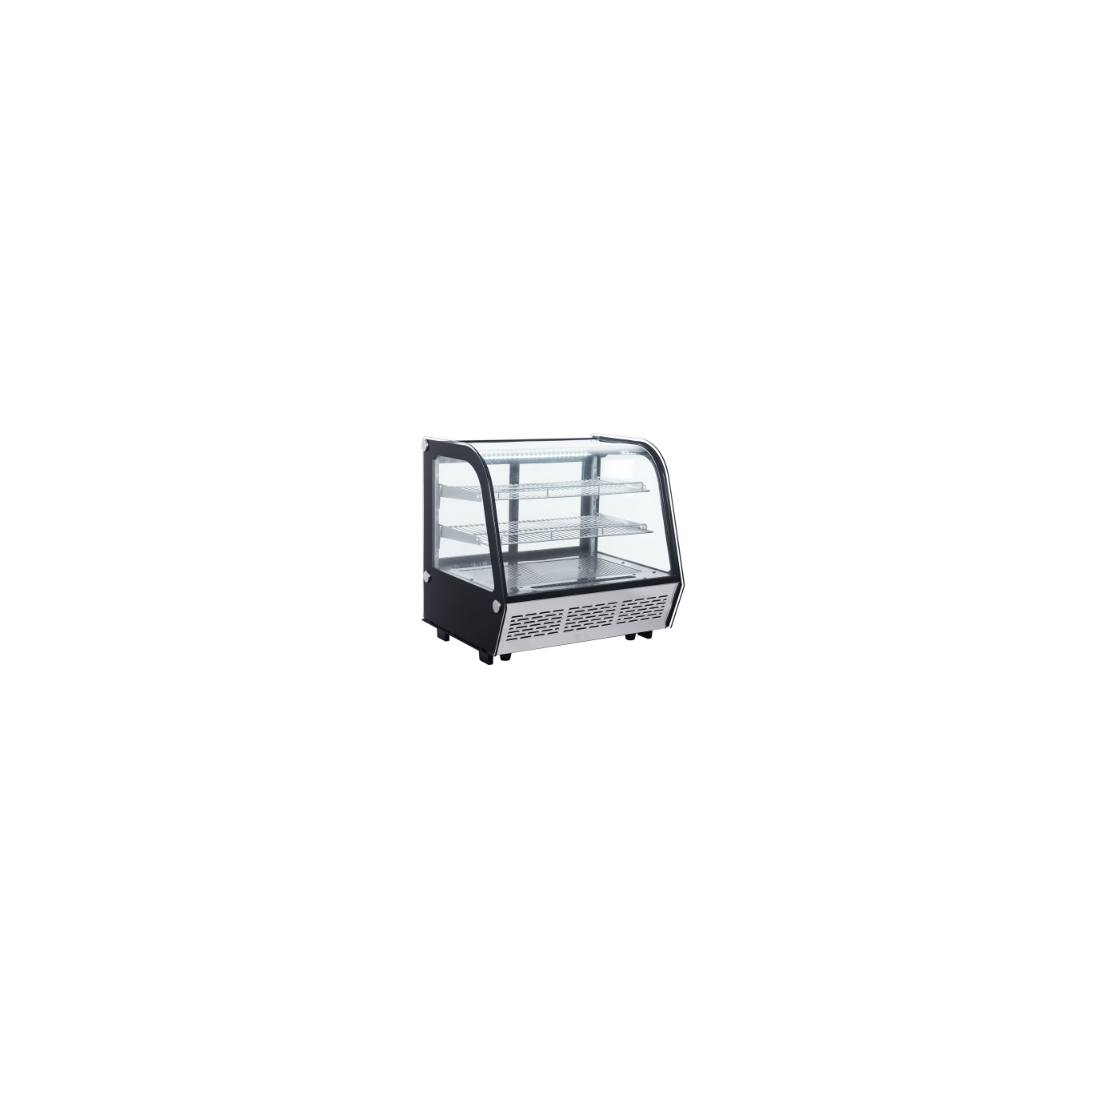 OMAJ XCW-120L Cake Display Chiller Countertop Curved Glass  -70cm|mkayn|مكاين